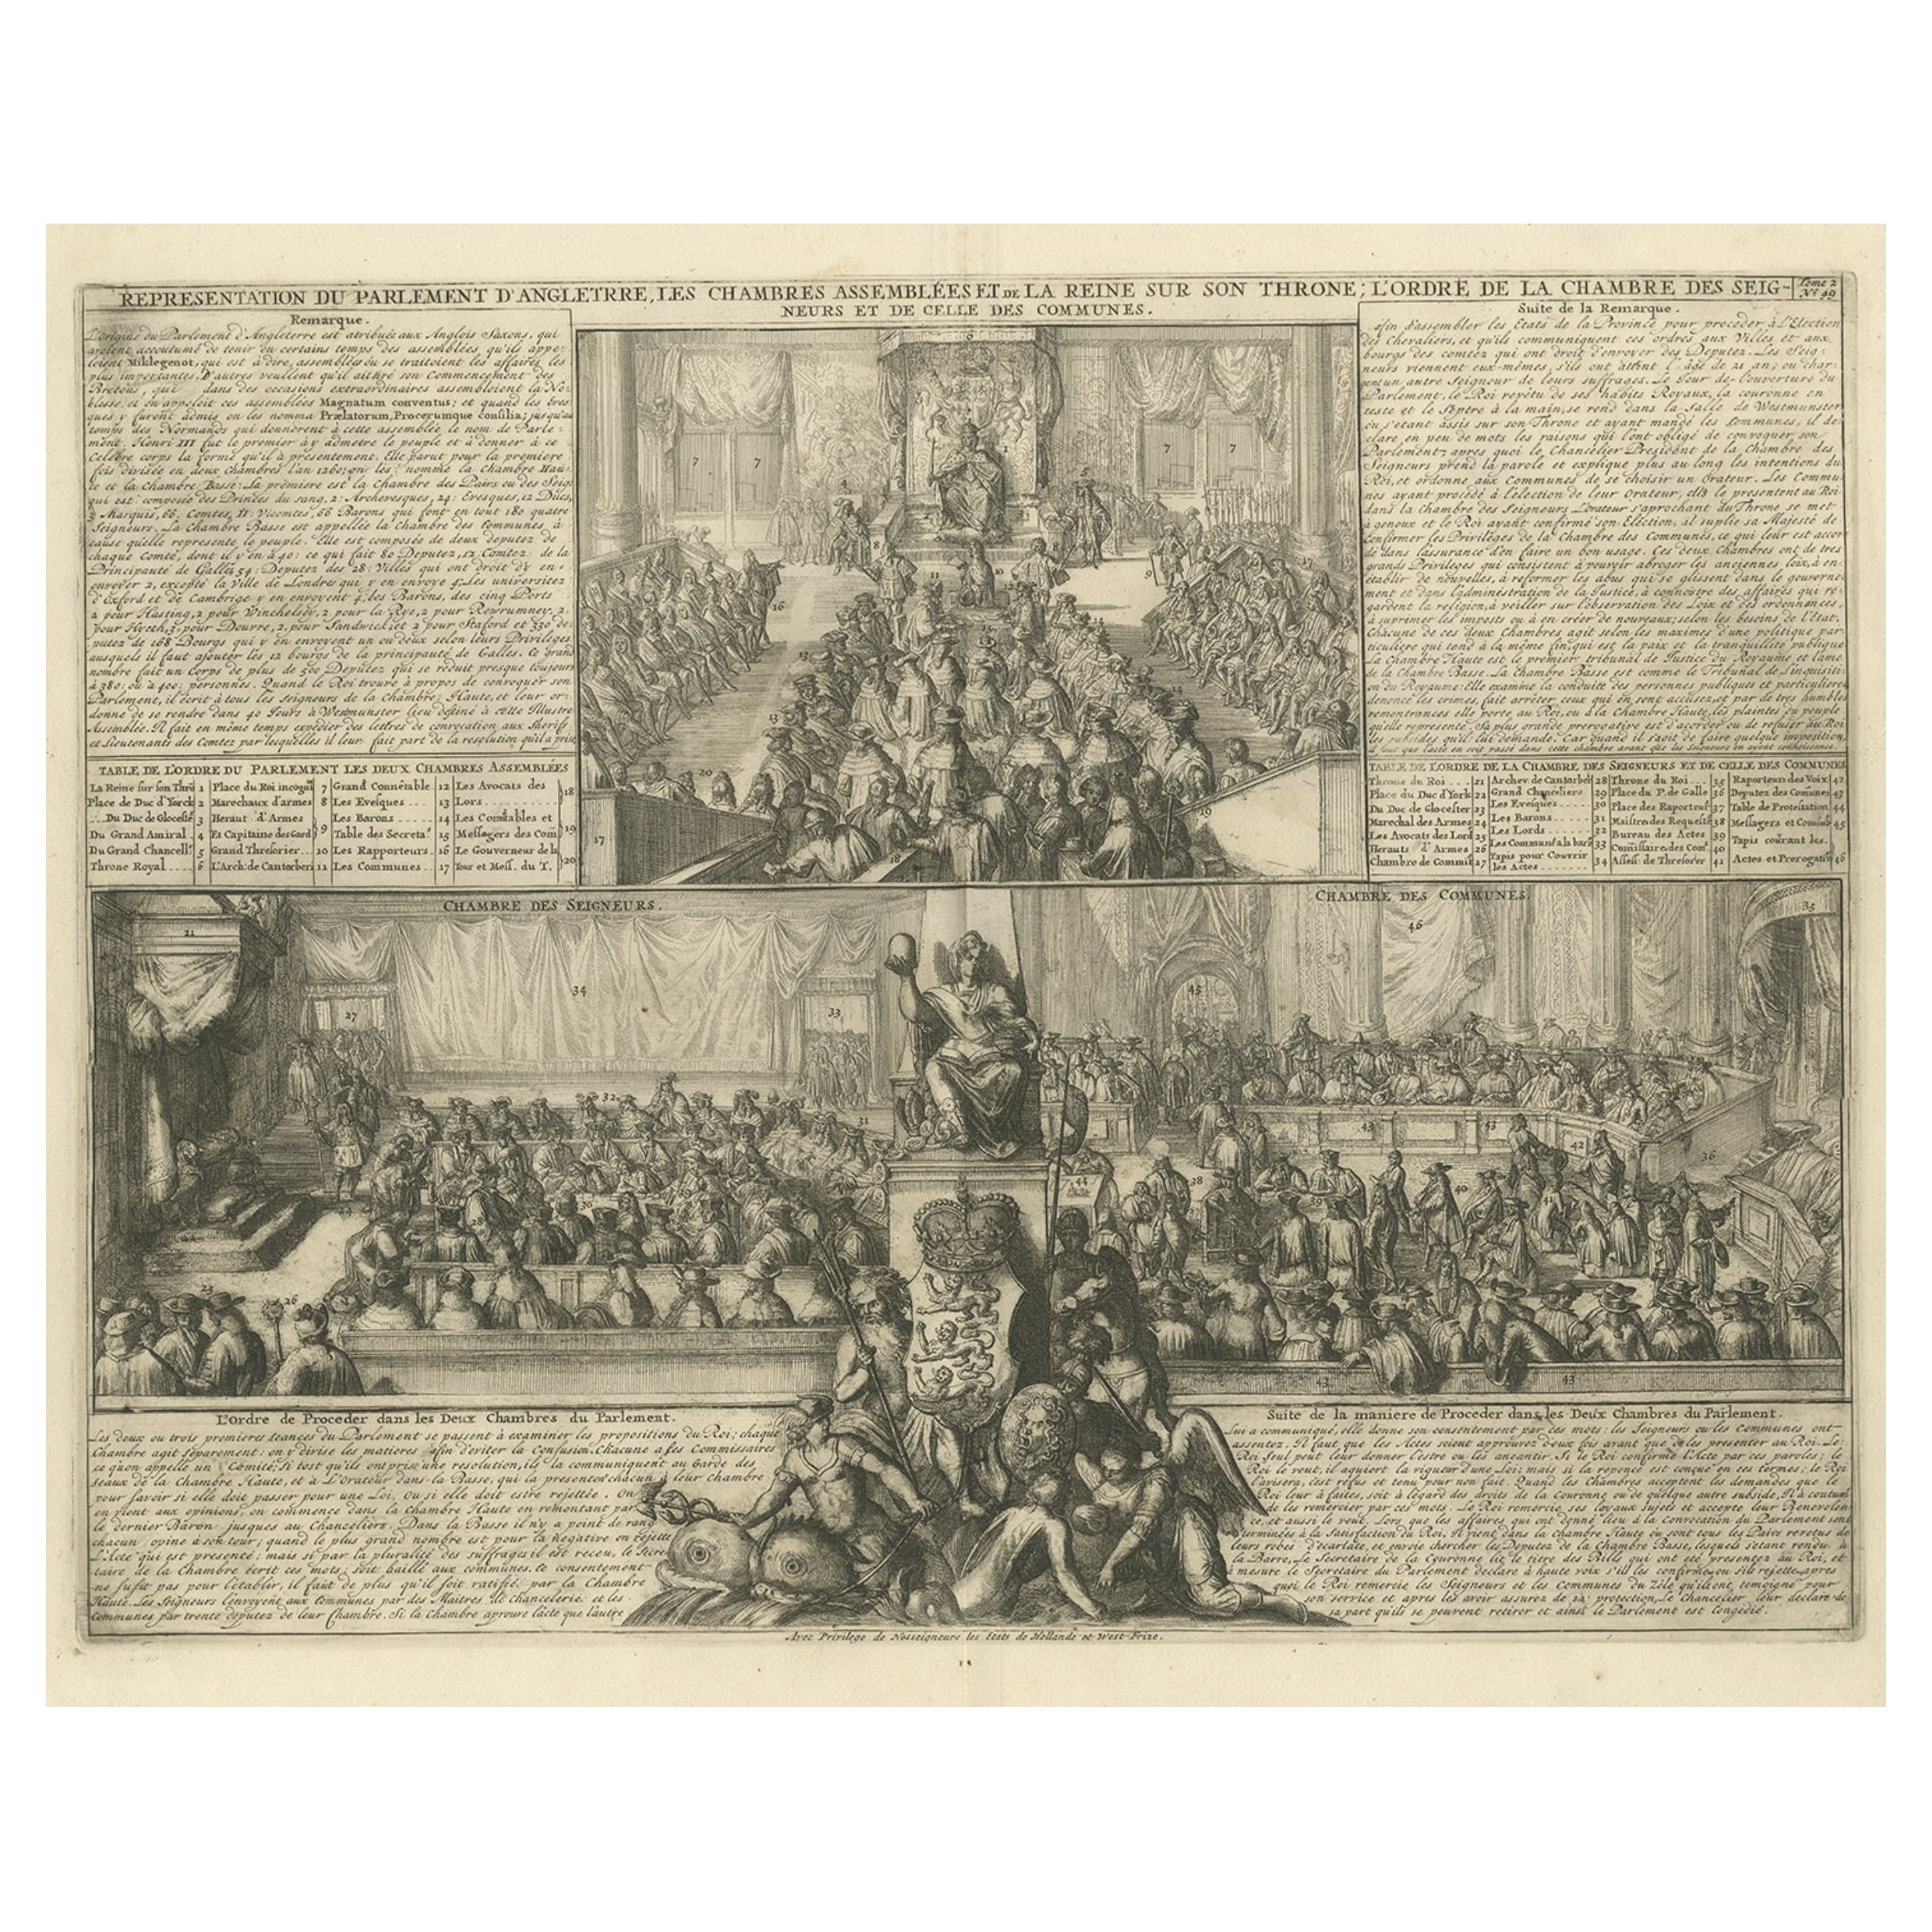 Print of the British Parliament & an Assembly before the King of England, 1732